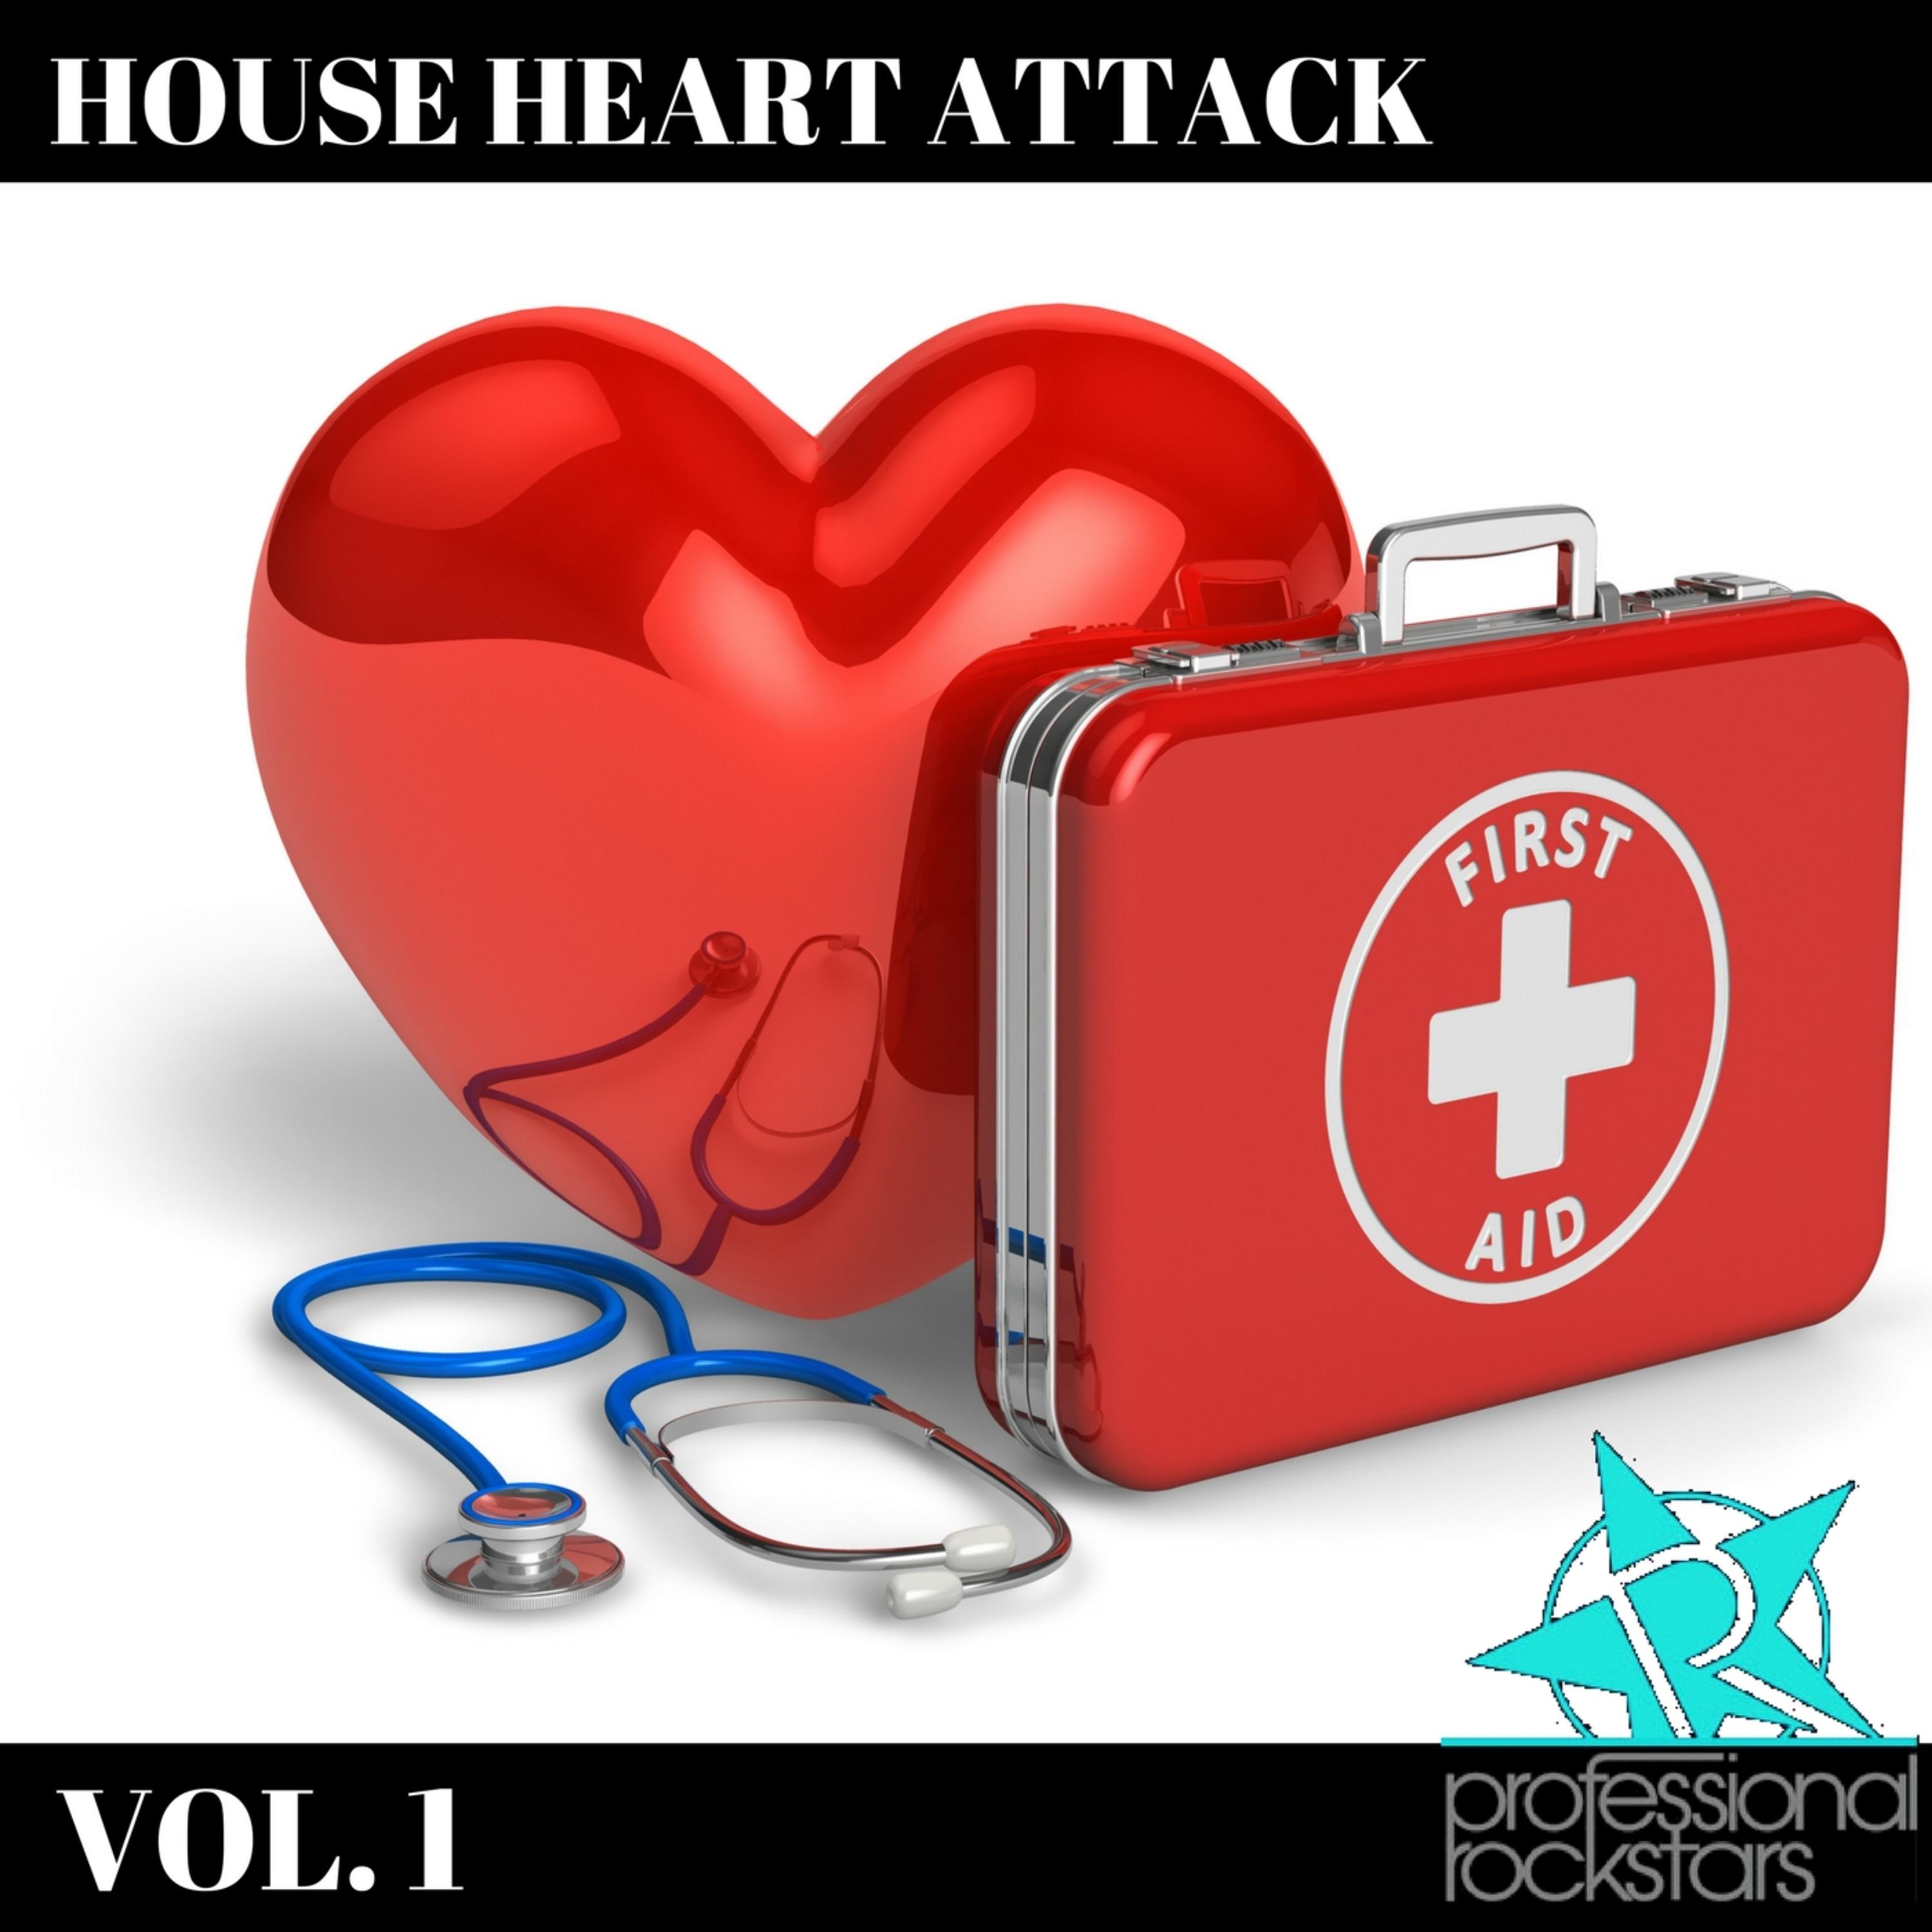 House Heart Attack Vol. 1